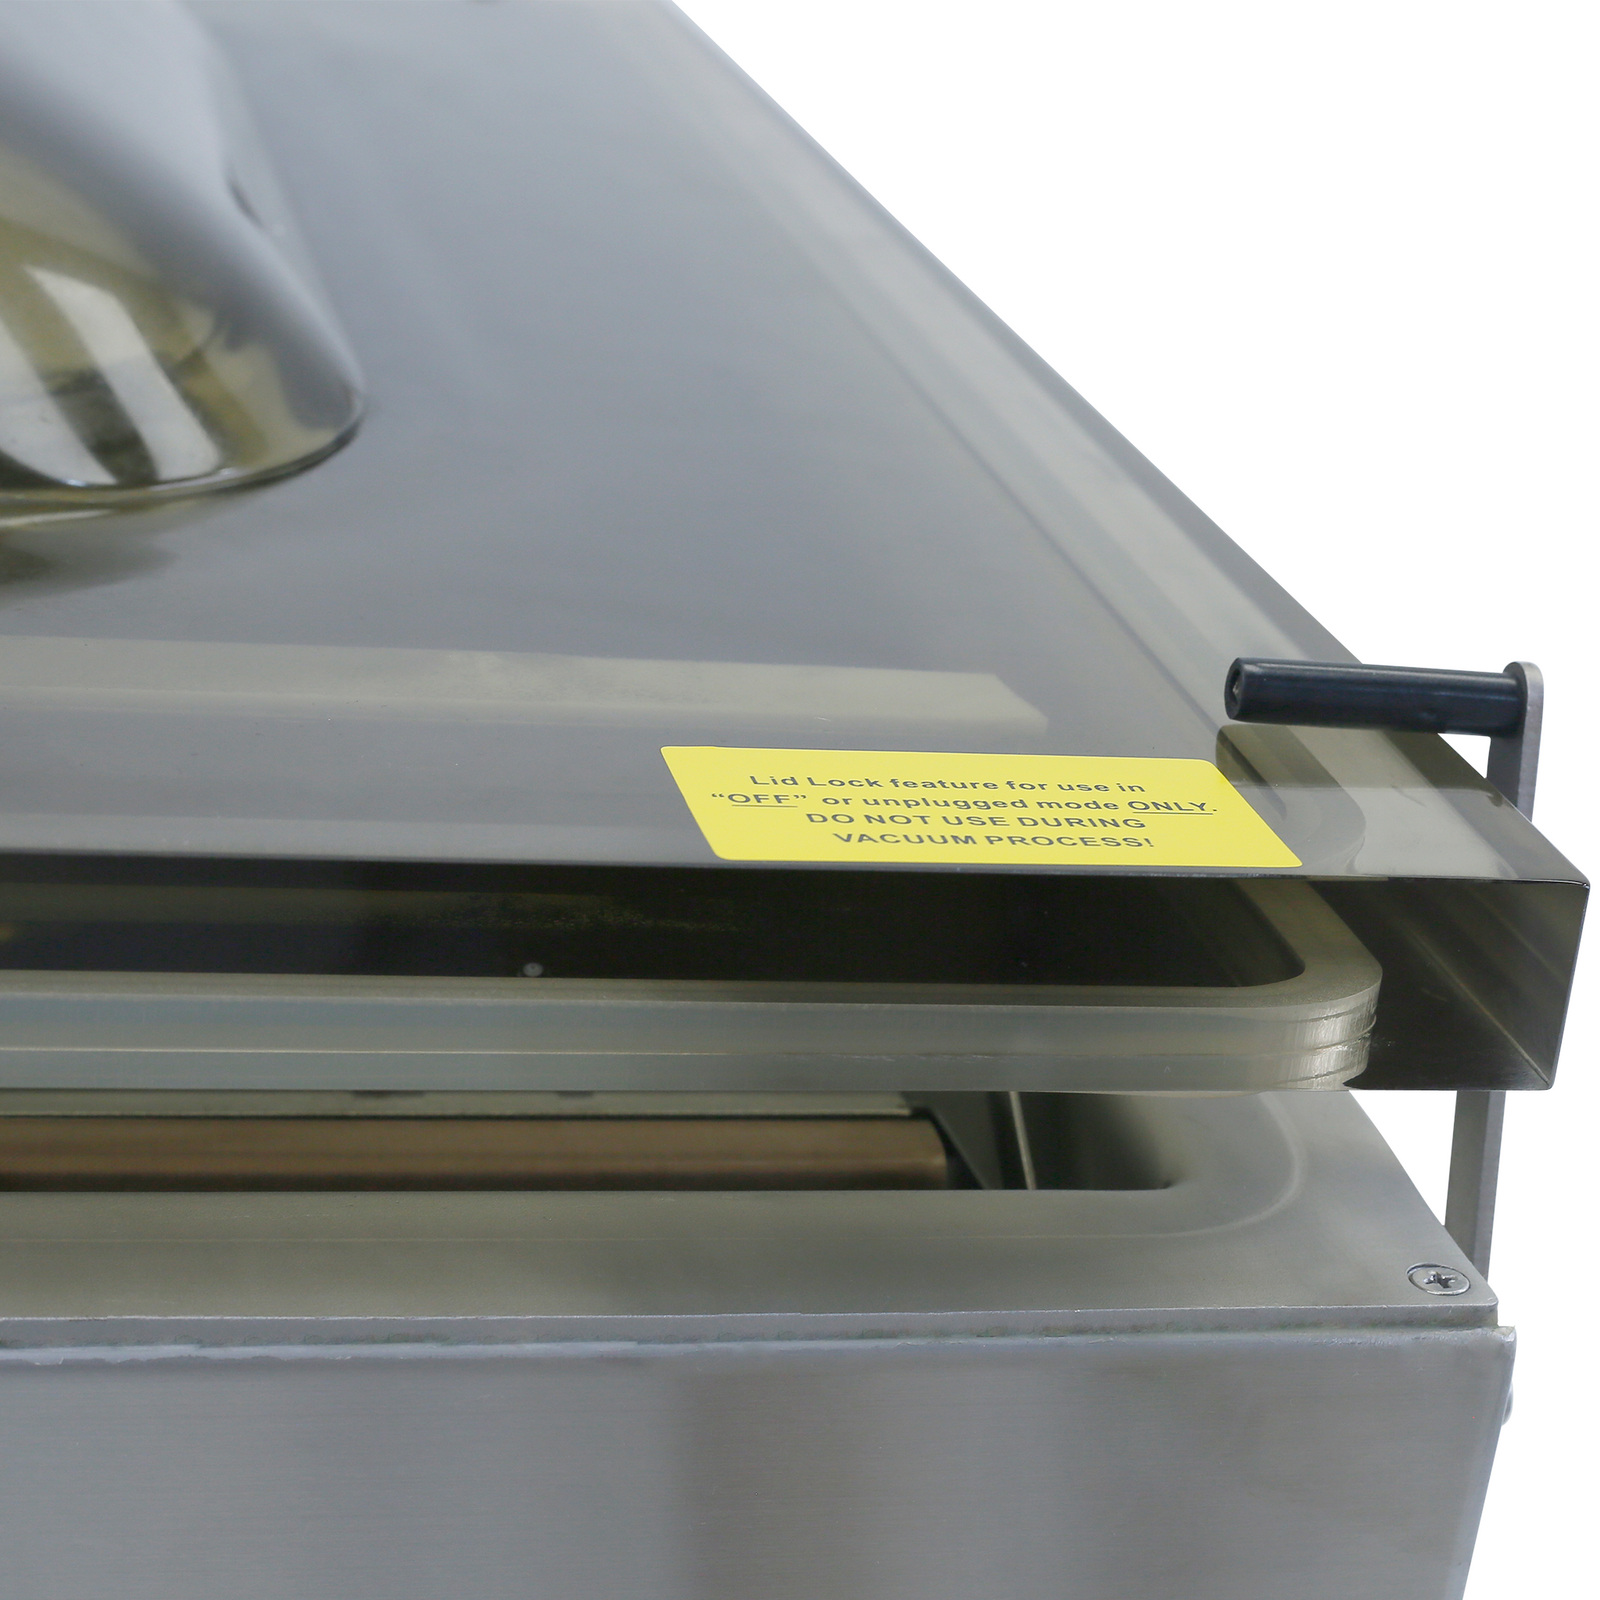 Close up of the bracket holding the lid of the JORES TECHNOLOGIES® vacuum sealer closed